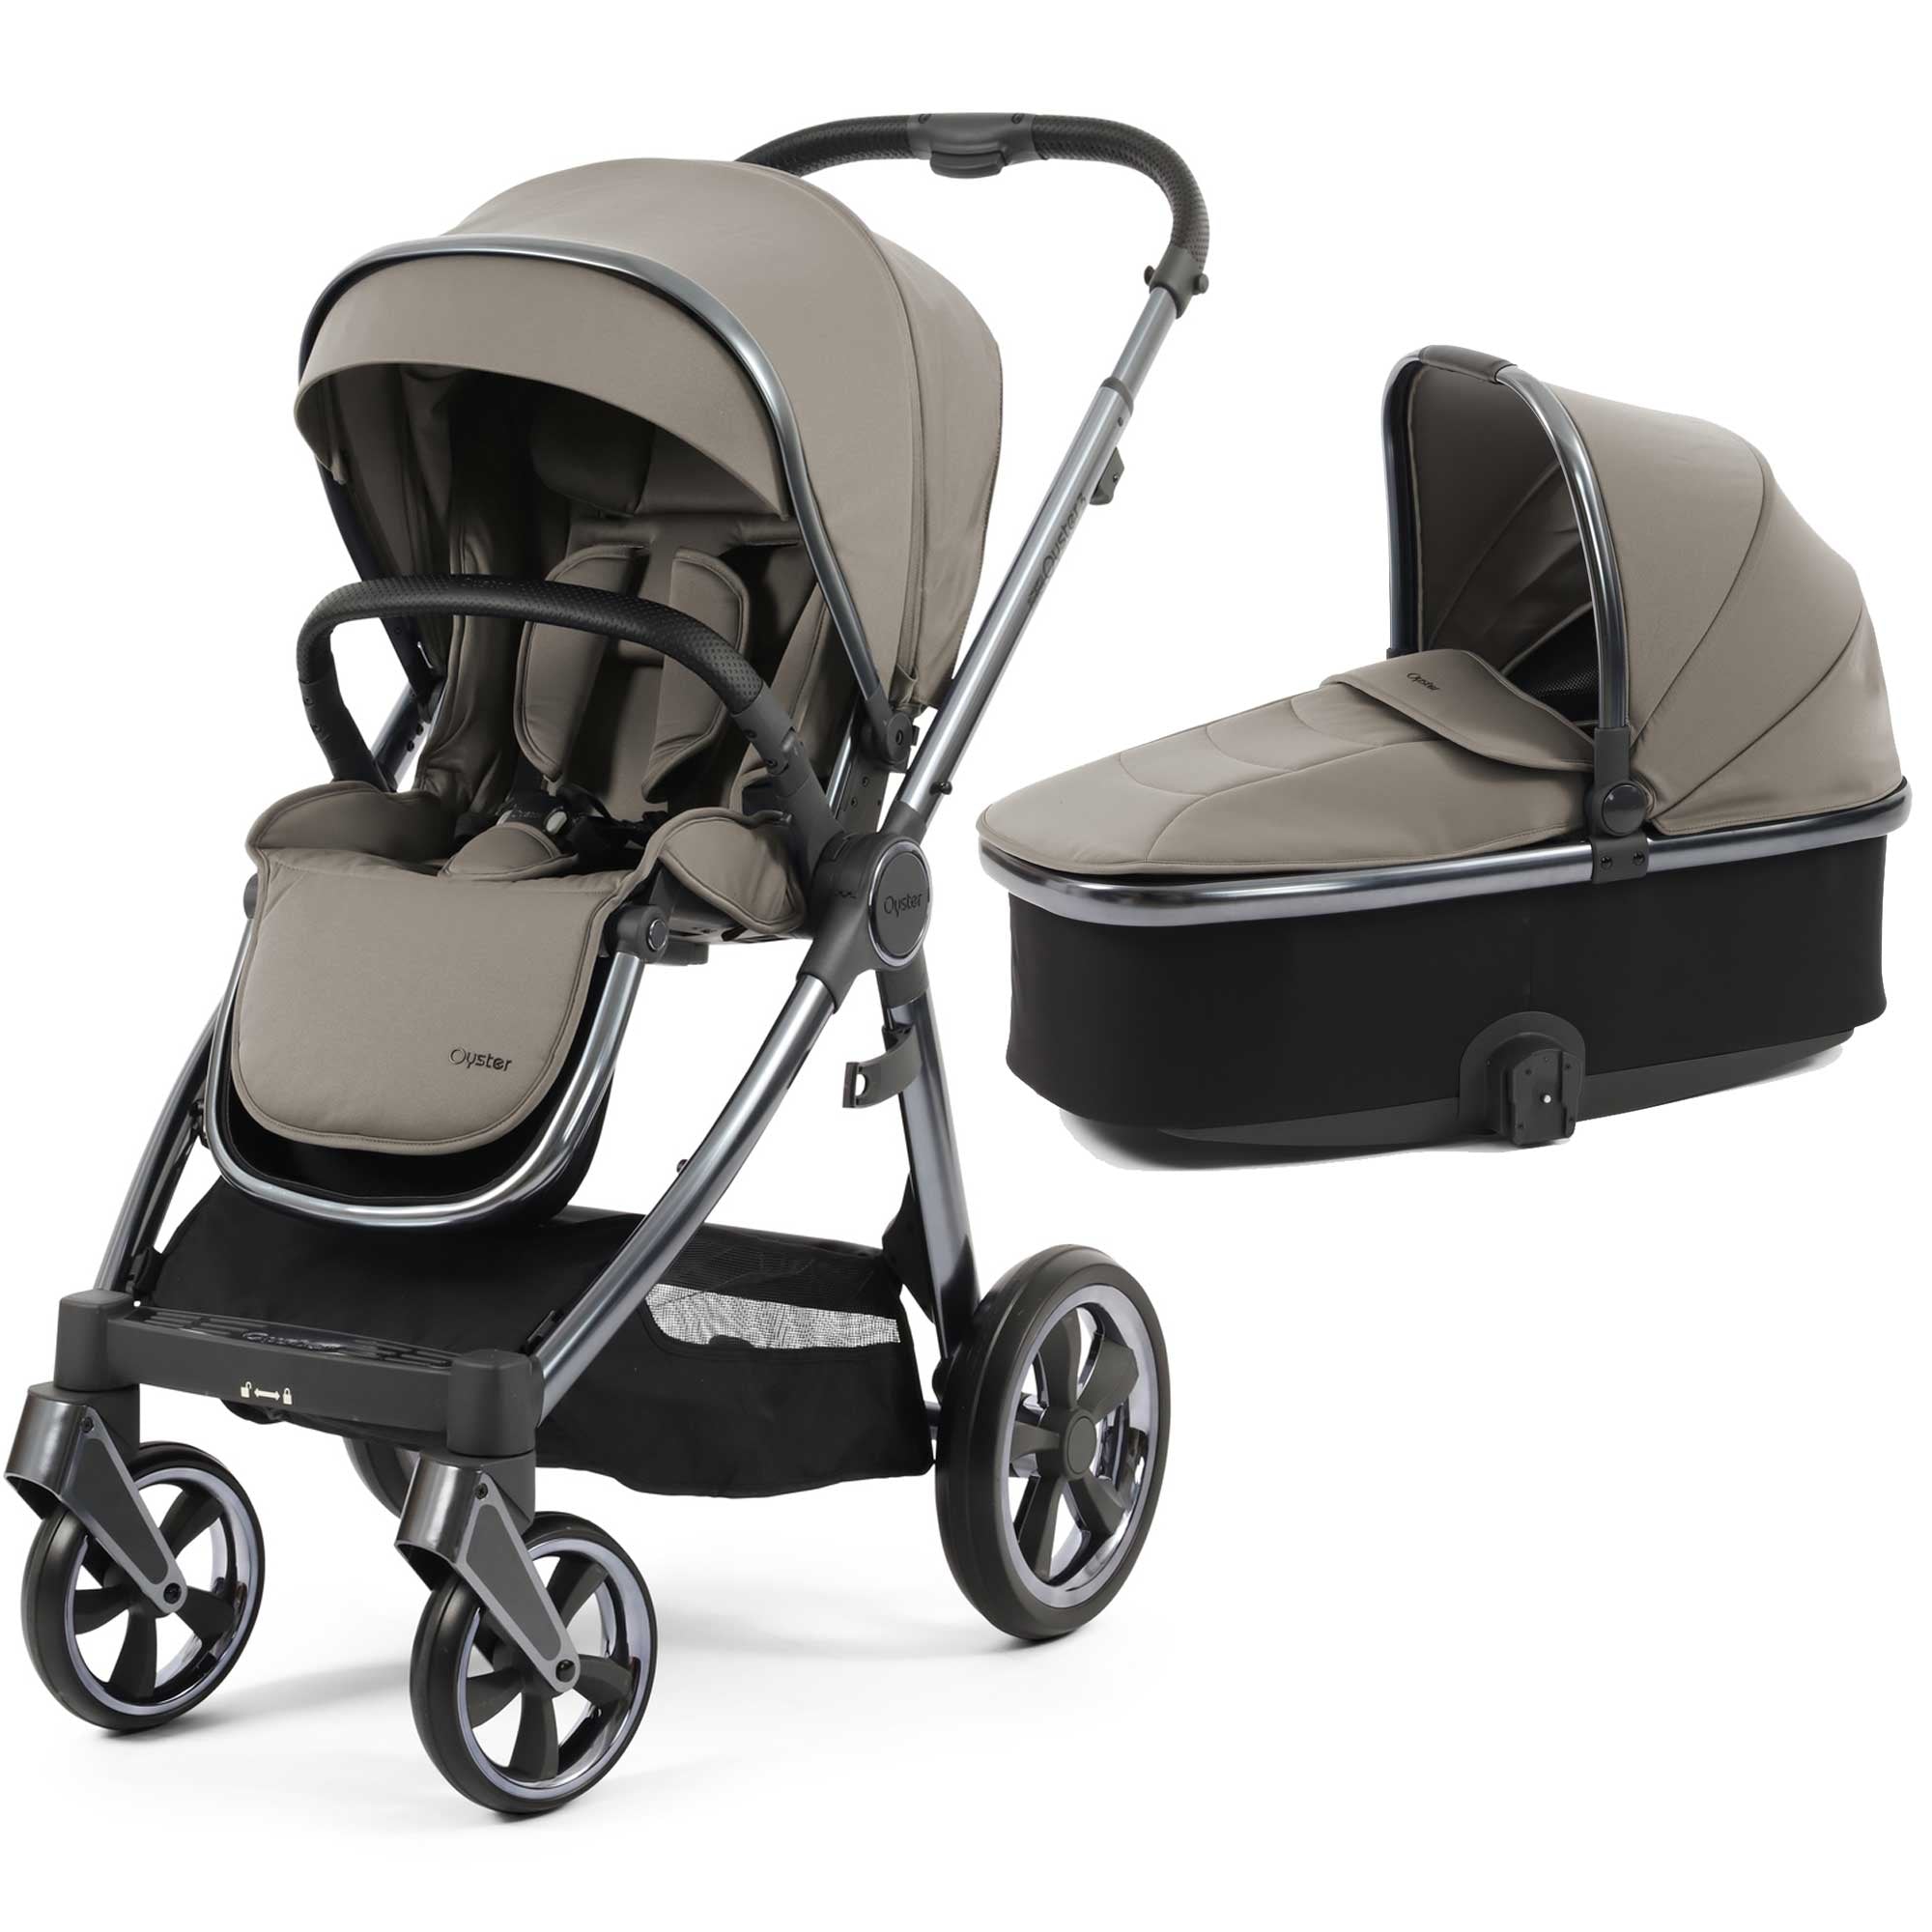 Babystyle Oyster 3 Pushchair + Carrycot - Stone - For Your Little One